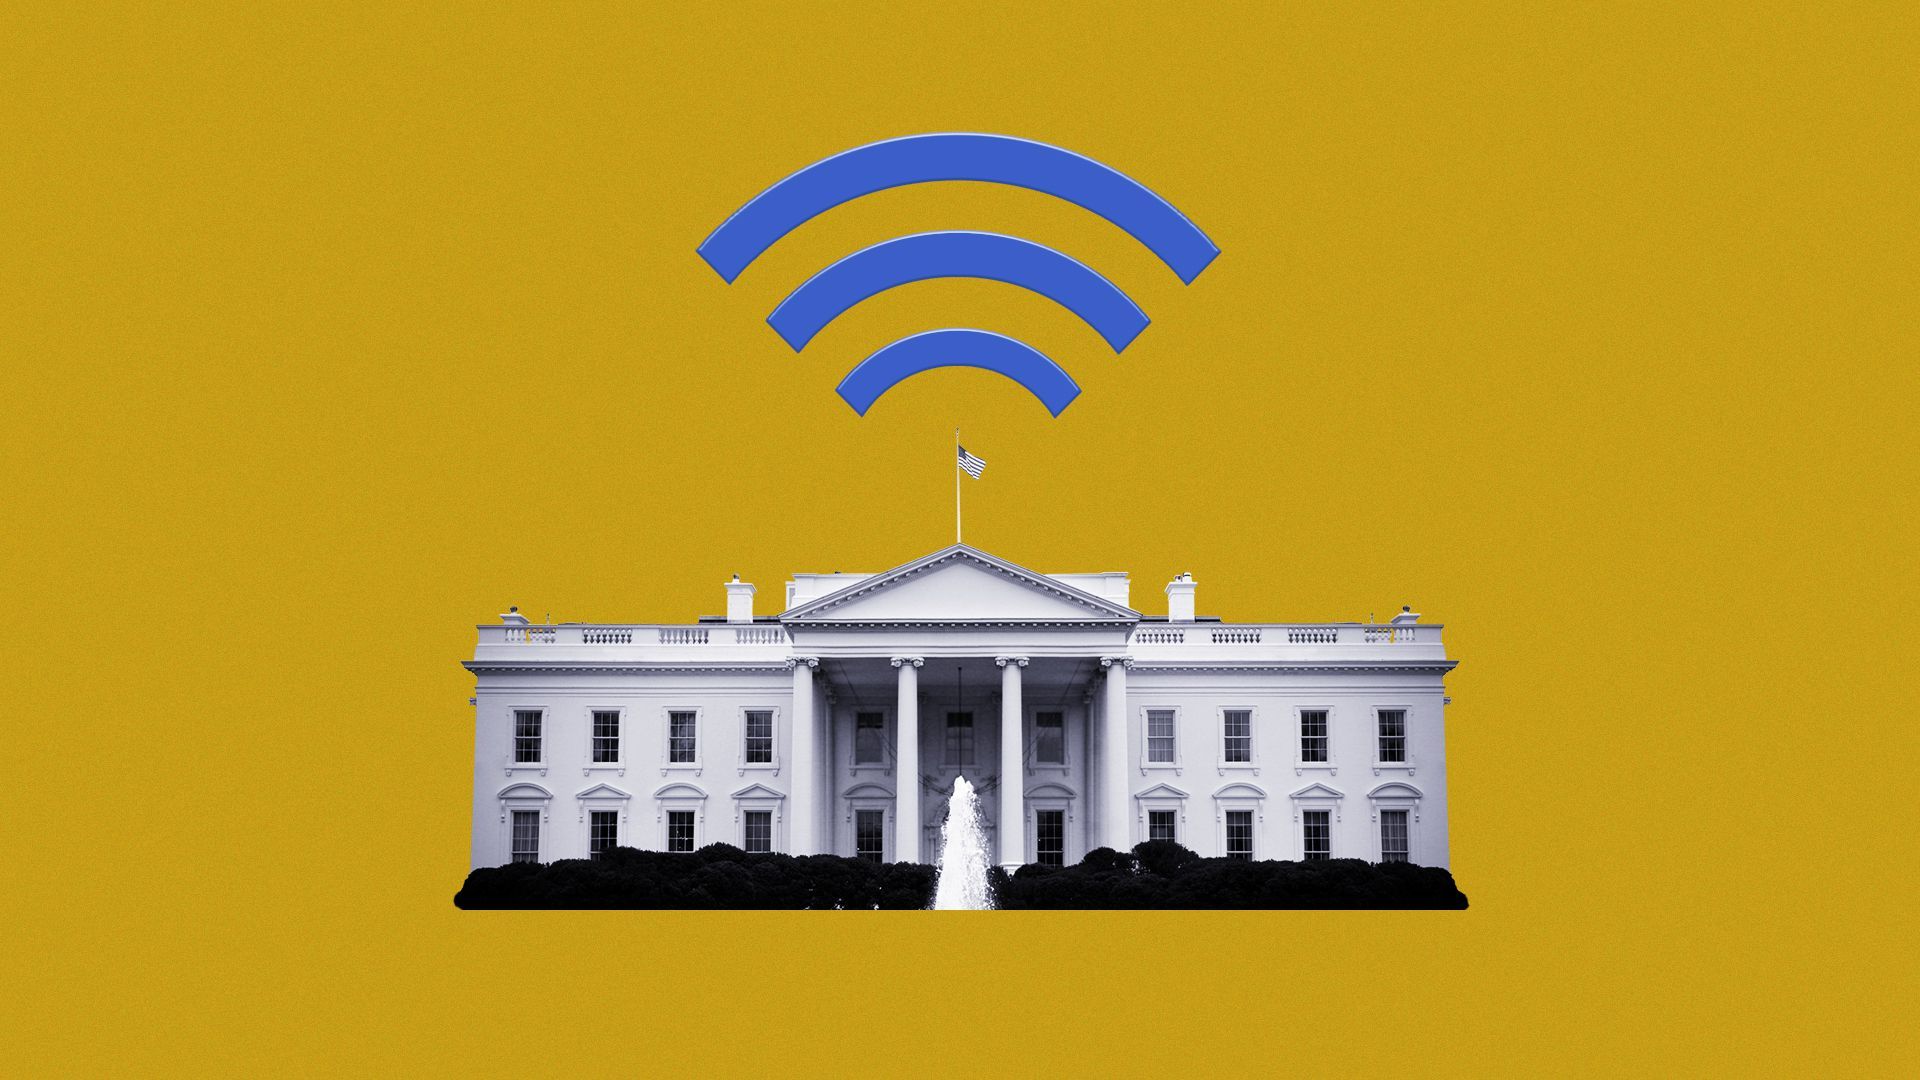 Illustration of the White House with a WiFi symbol above the building.